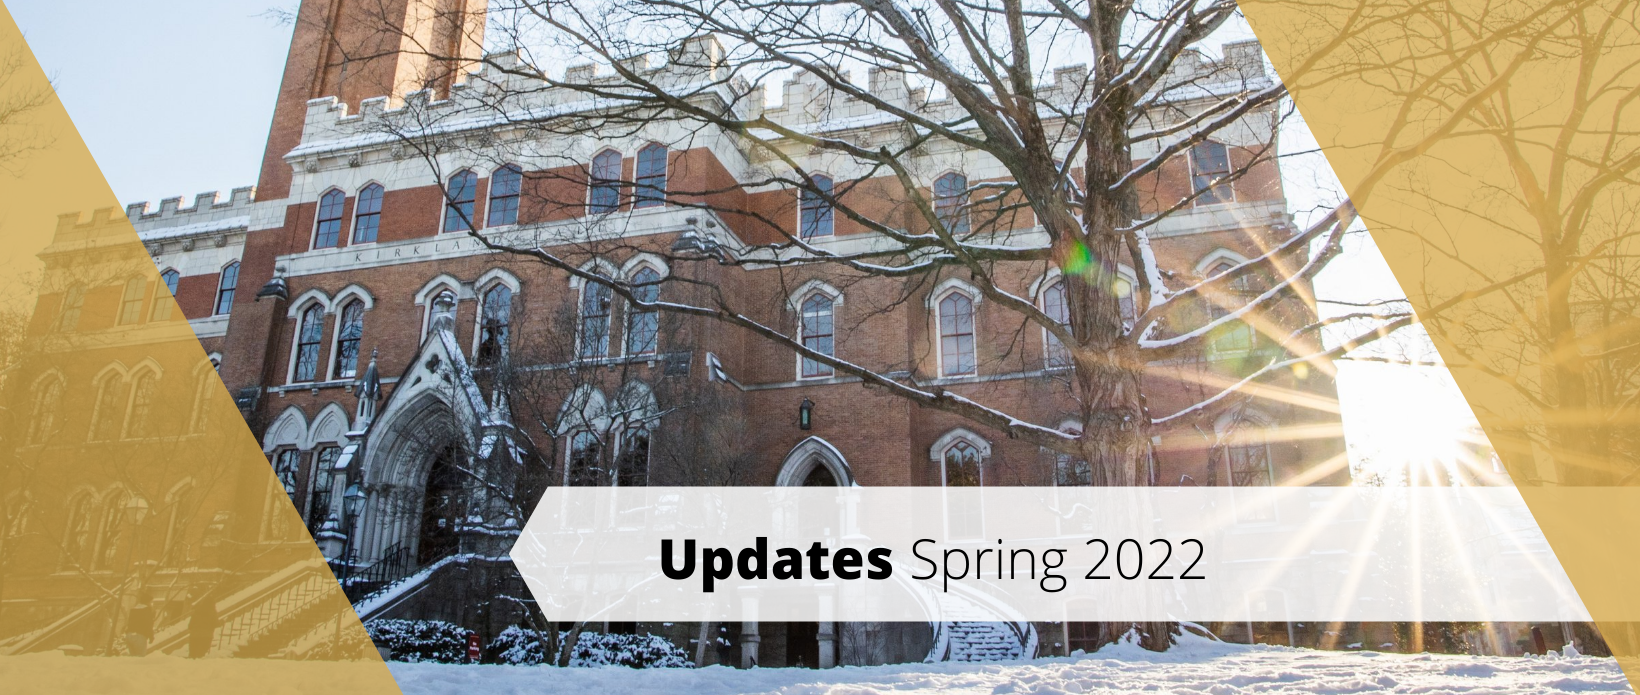 Stay informed on the latest updates about the spring semester